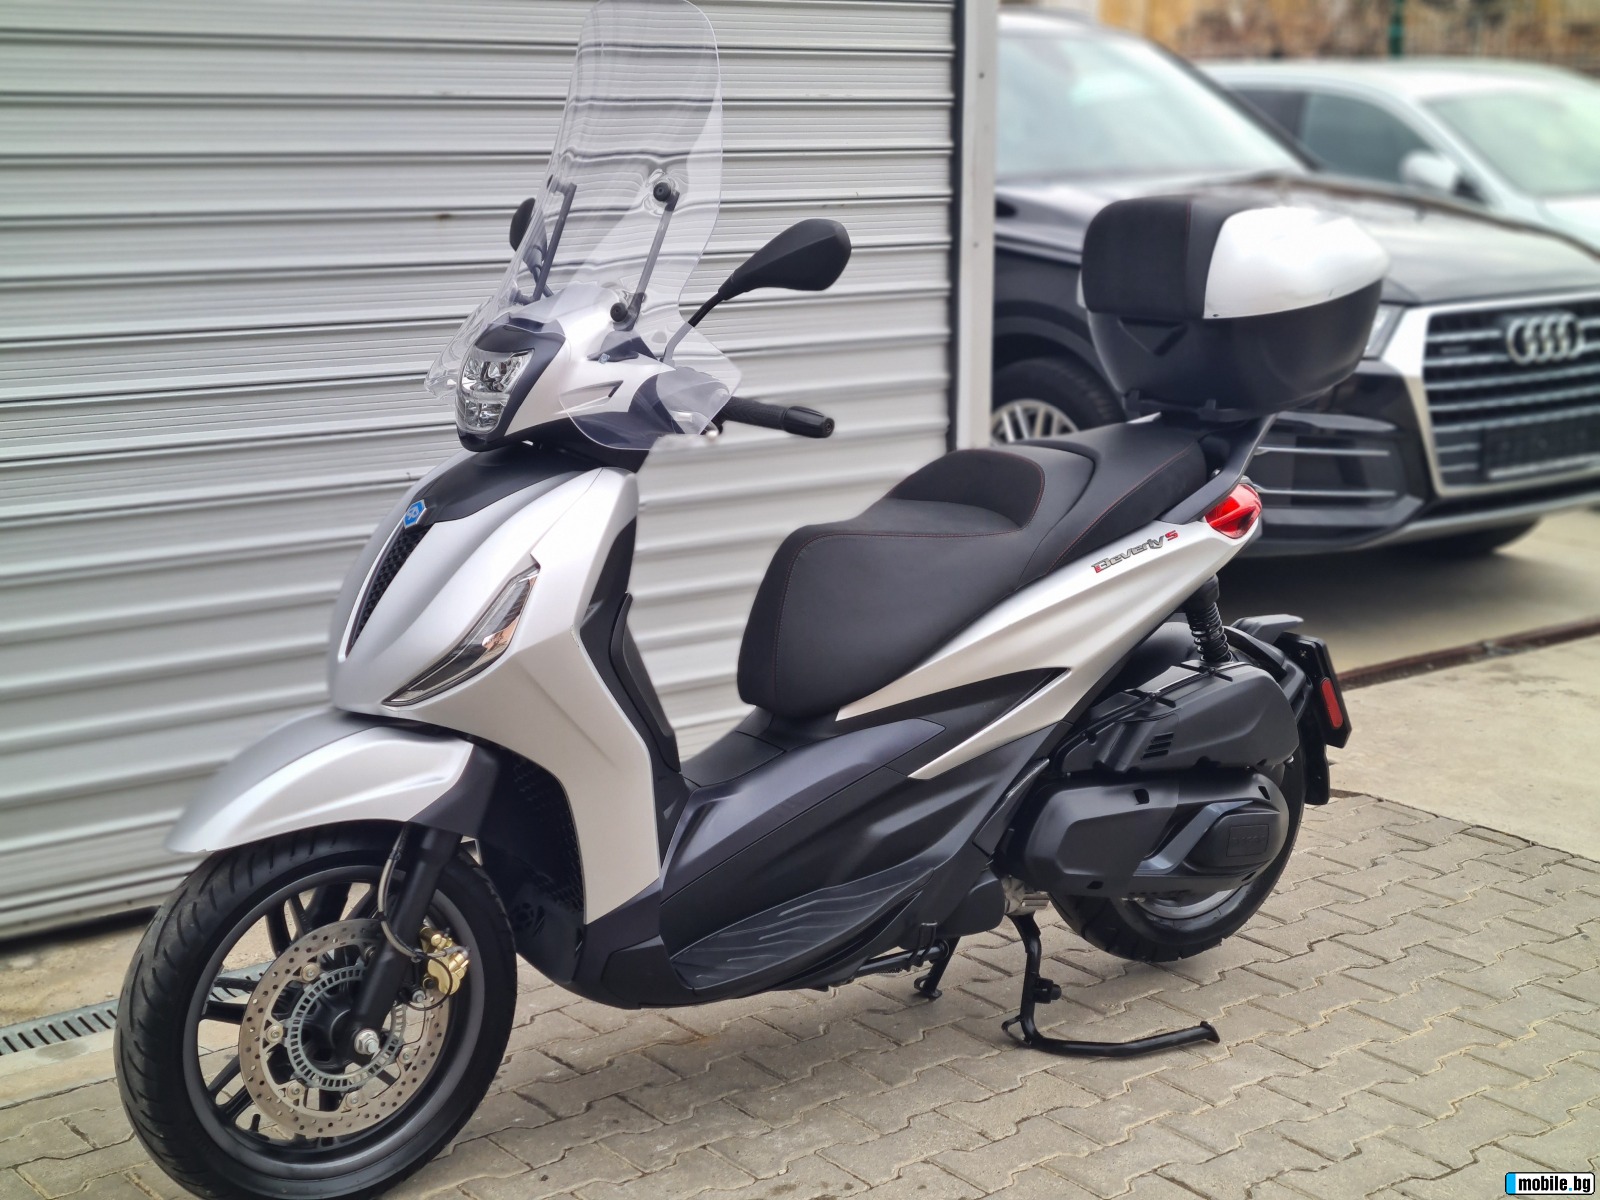 Piaggio Beverly 400ie S ABS/ASR | Mobile.bg   4